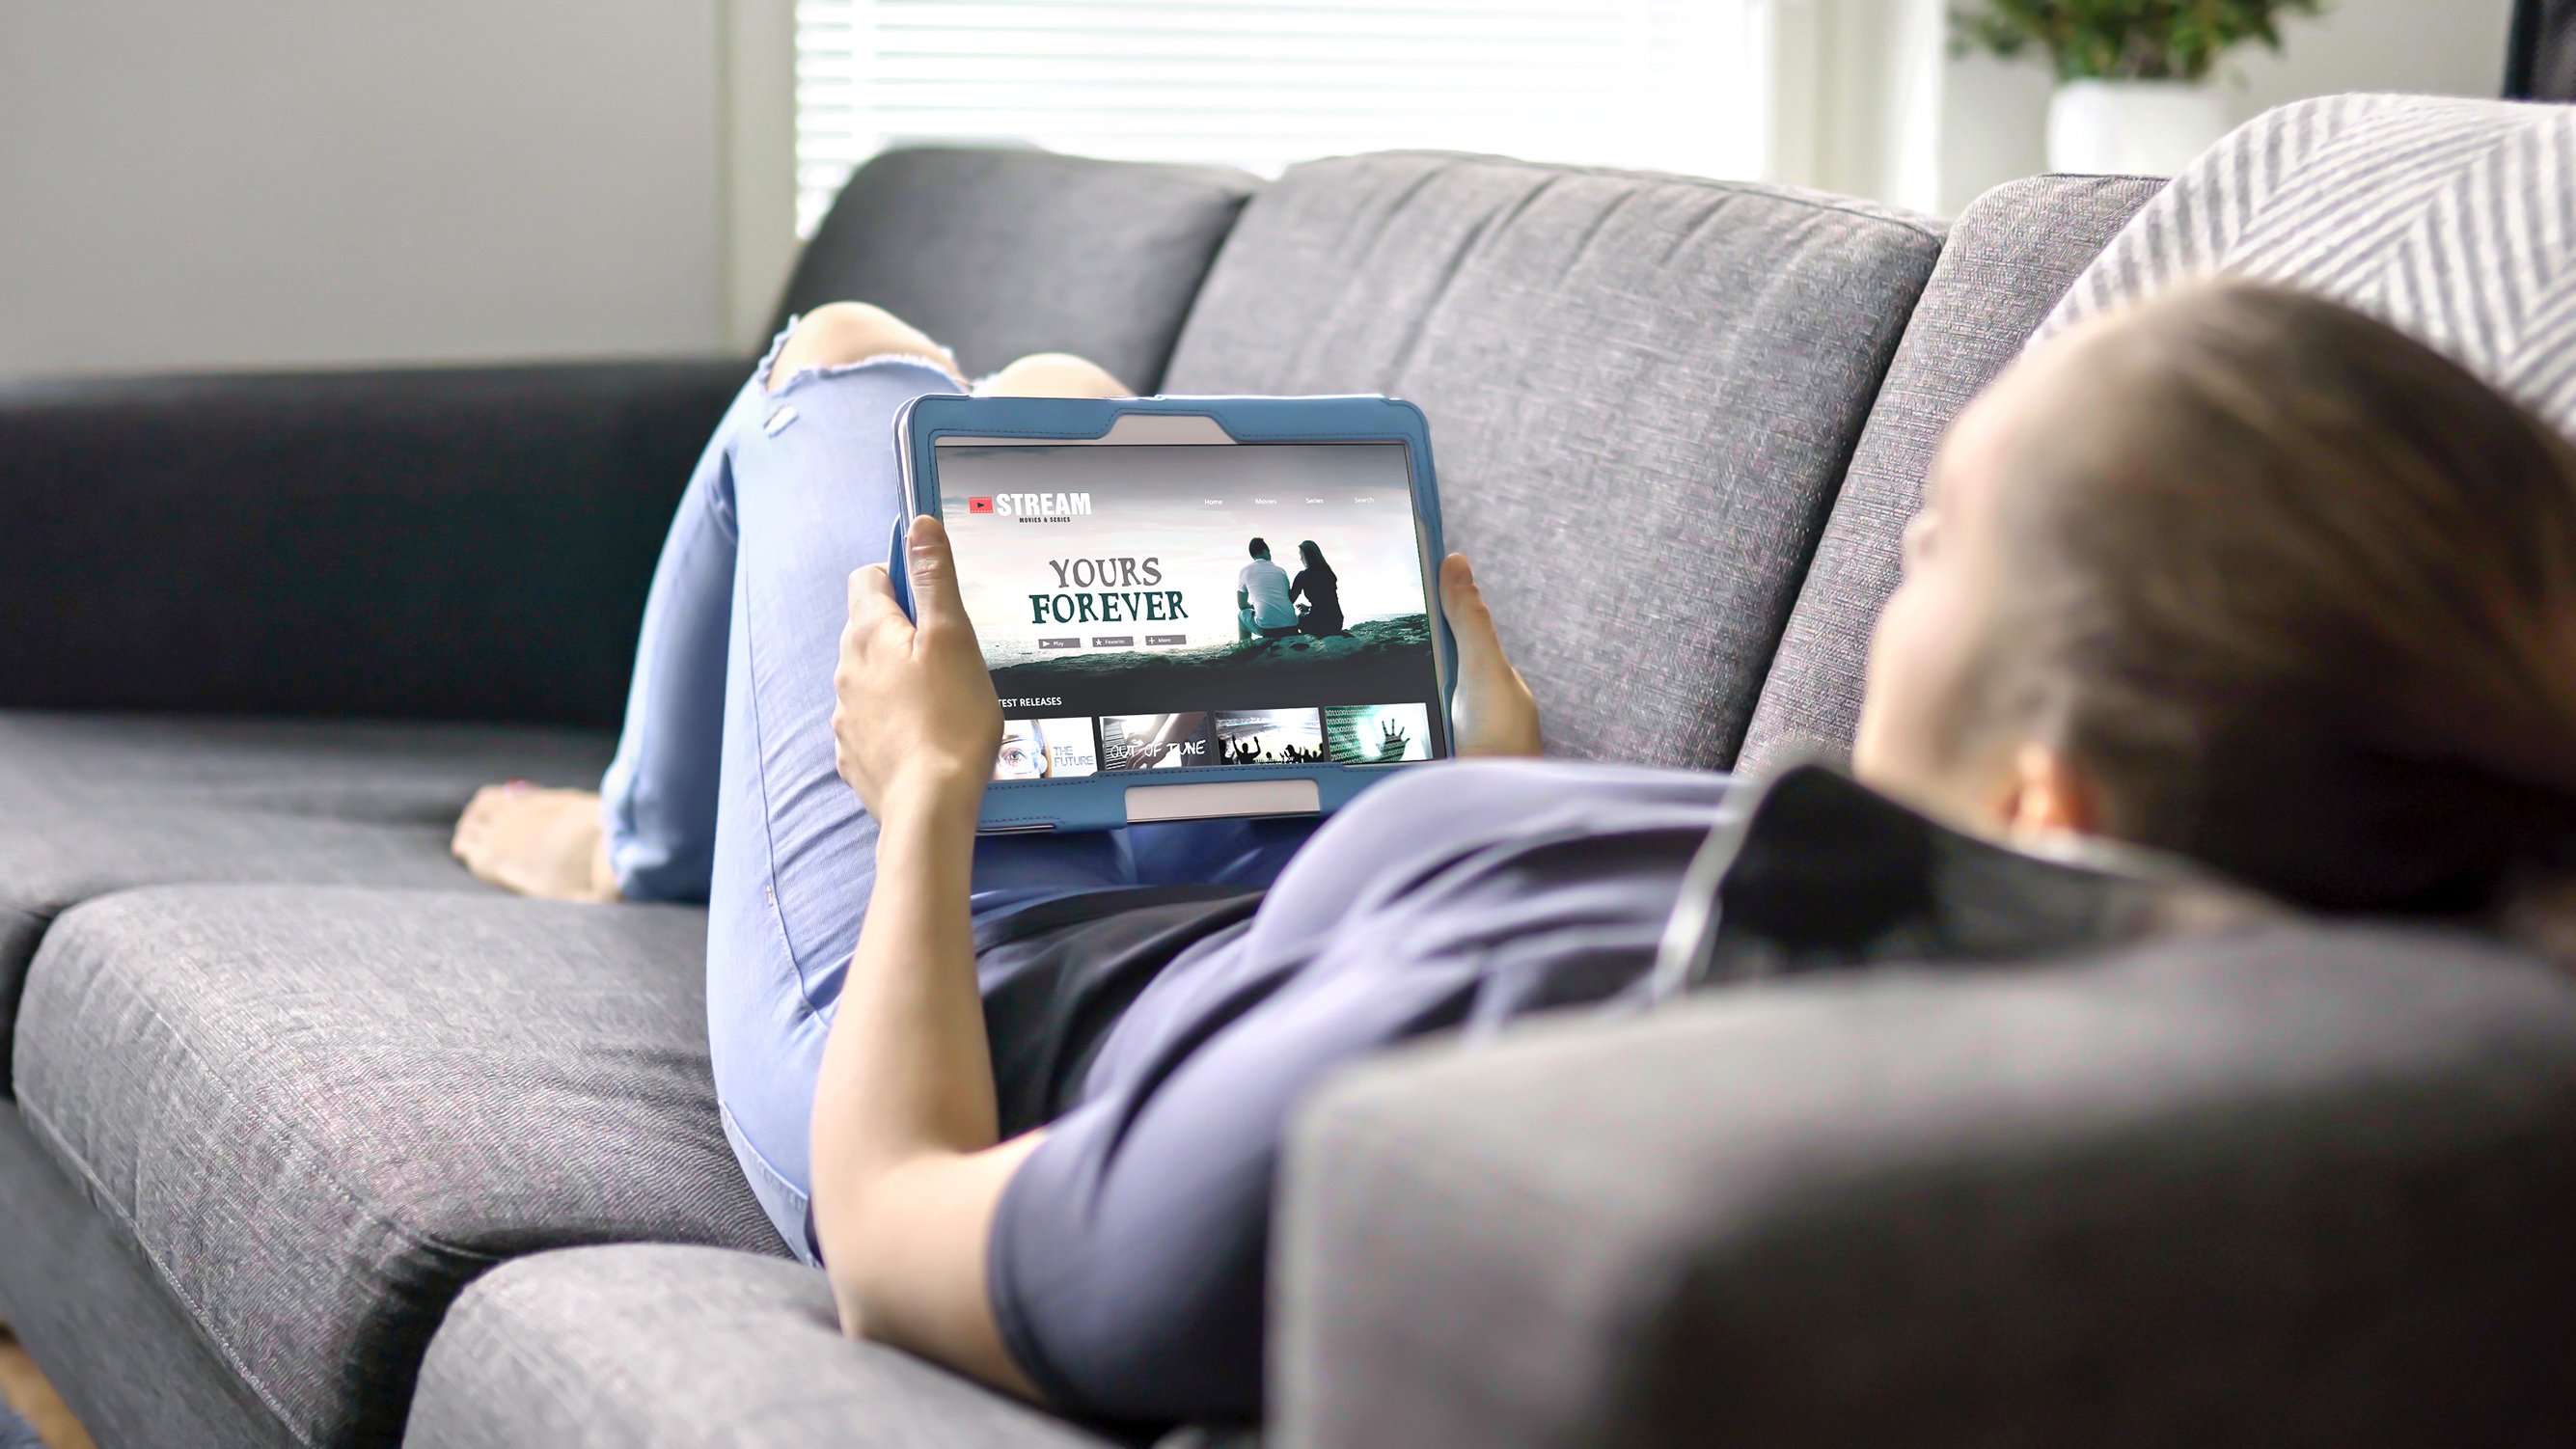 OTT Advertising with Streaming Services at home